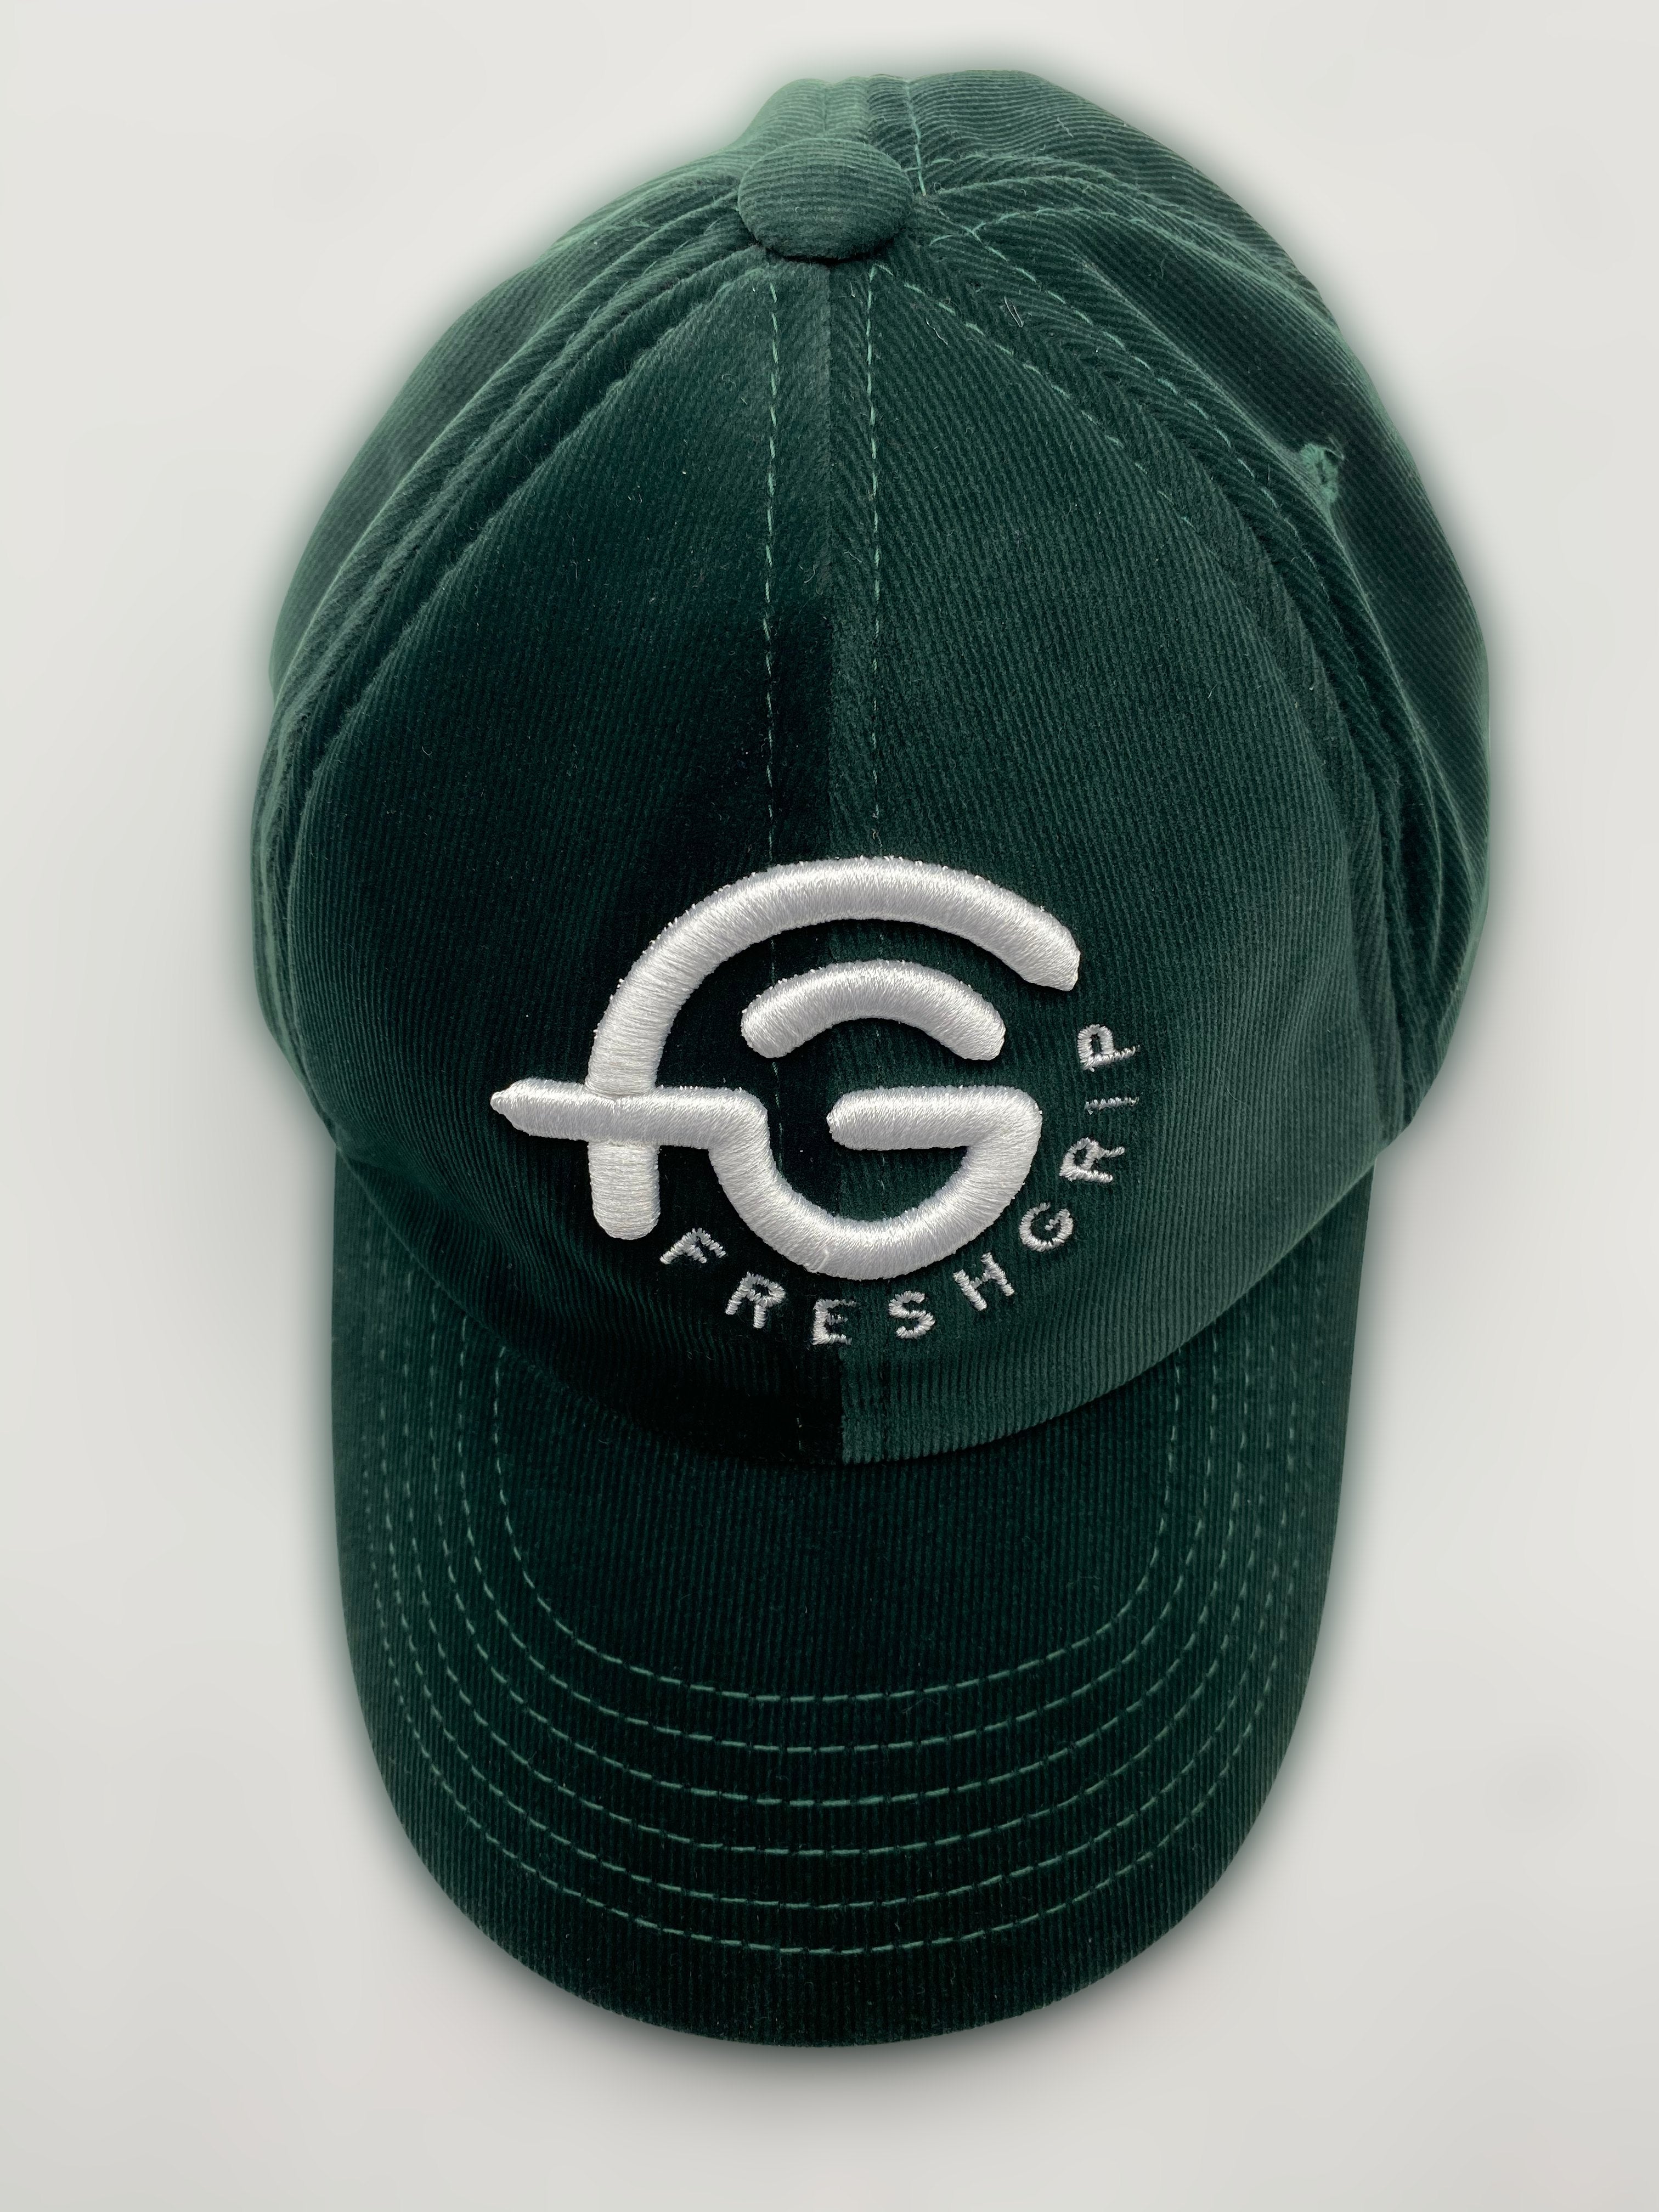 Green dad hat, stylish on and off the golf course